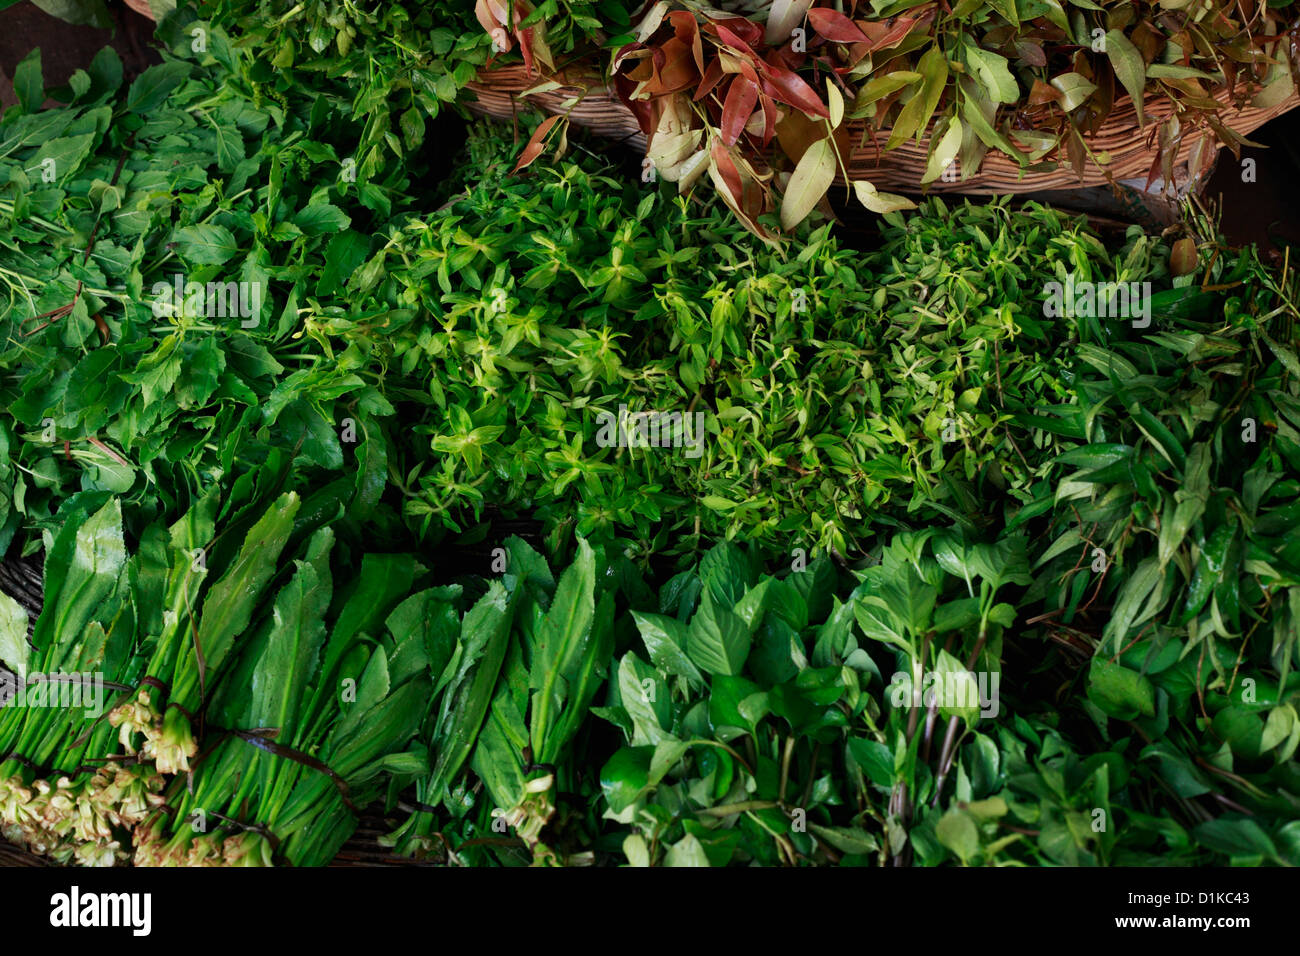 Different green vegetables for sale in market, Cambodia Stock Photo